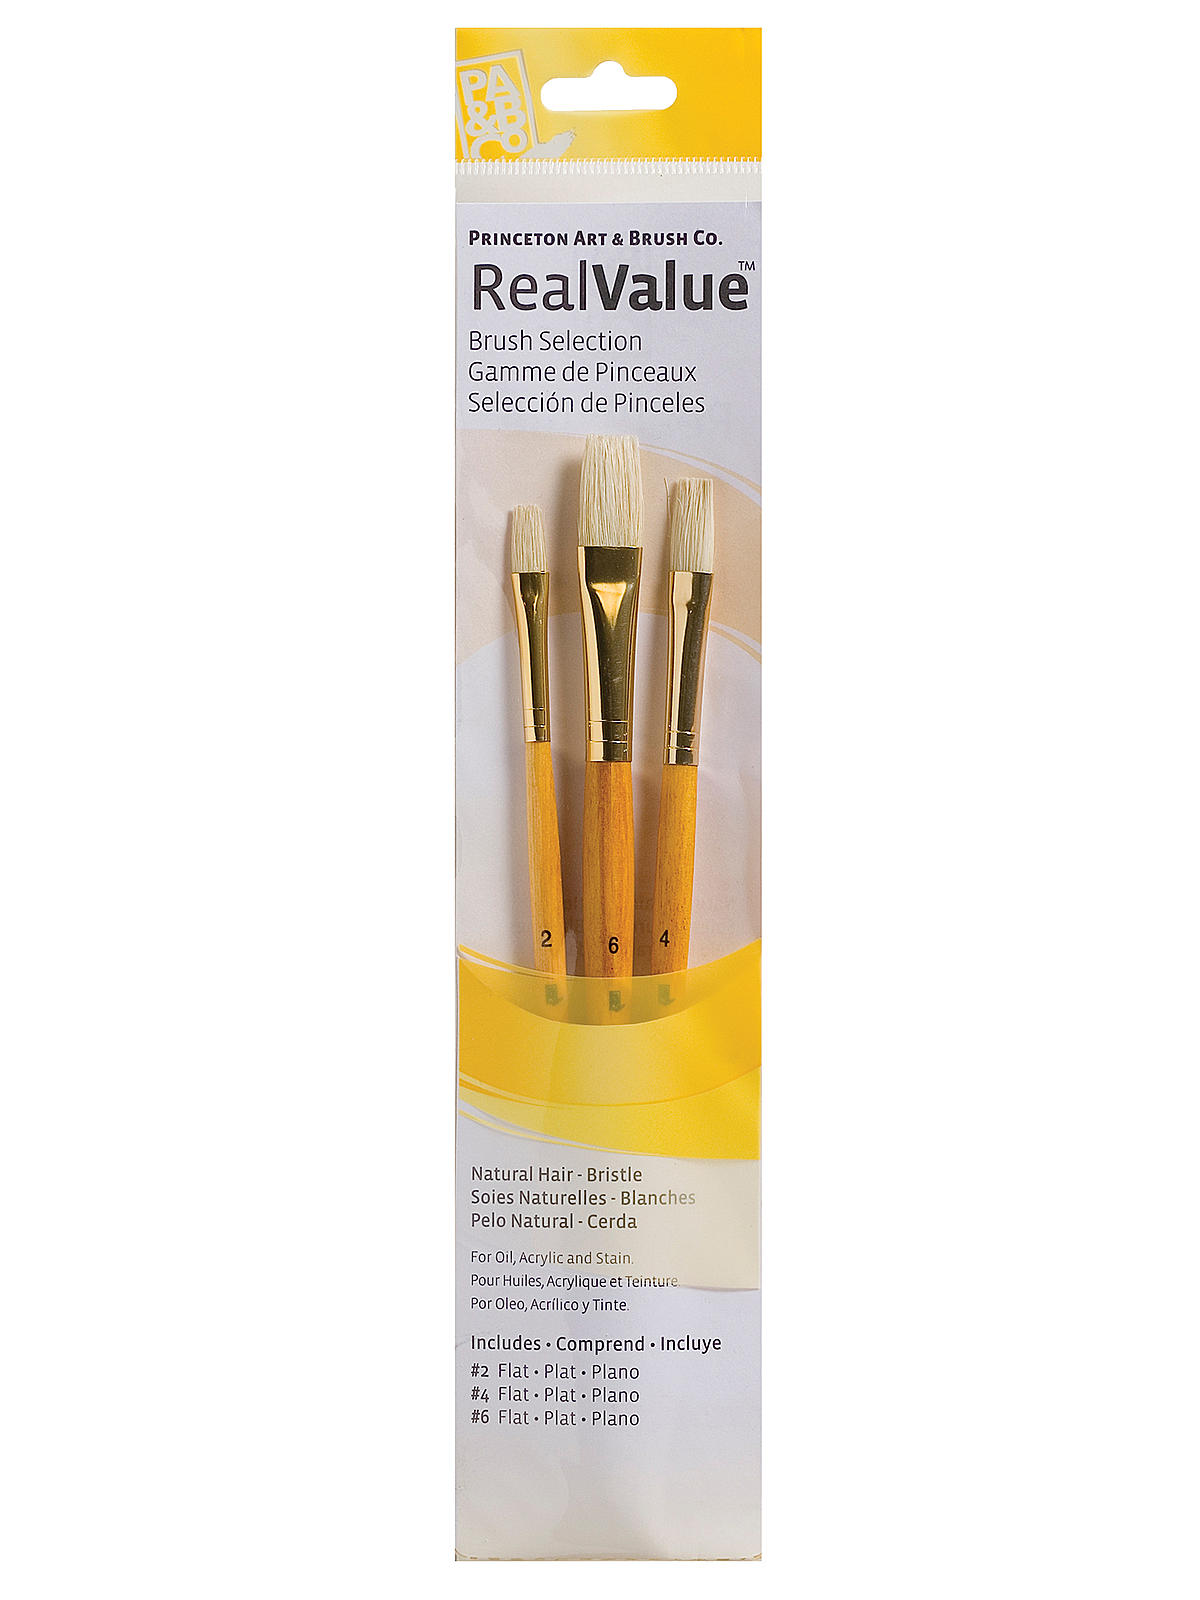 Real Value Series Yellow Handle Brush Sets 9104 set of 3